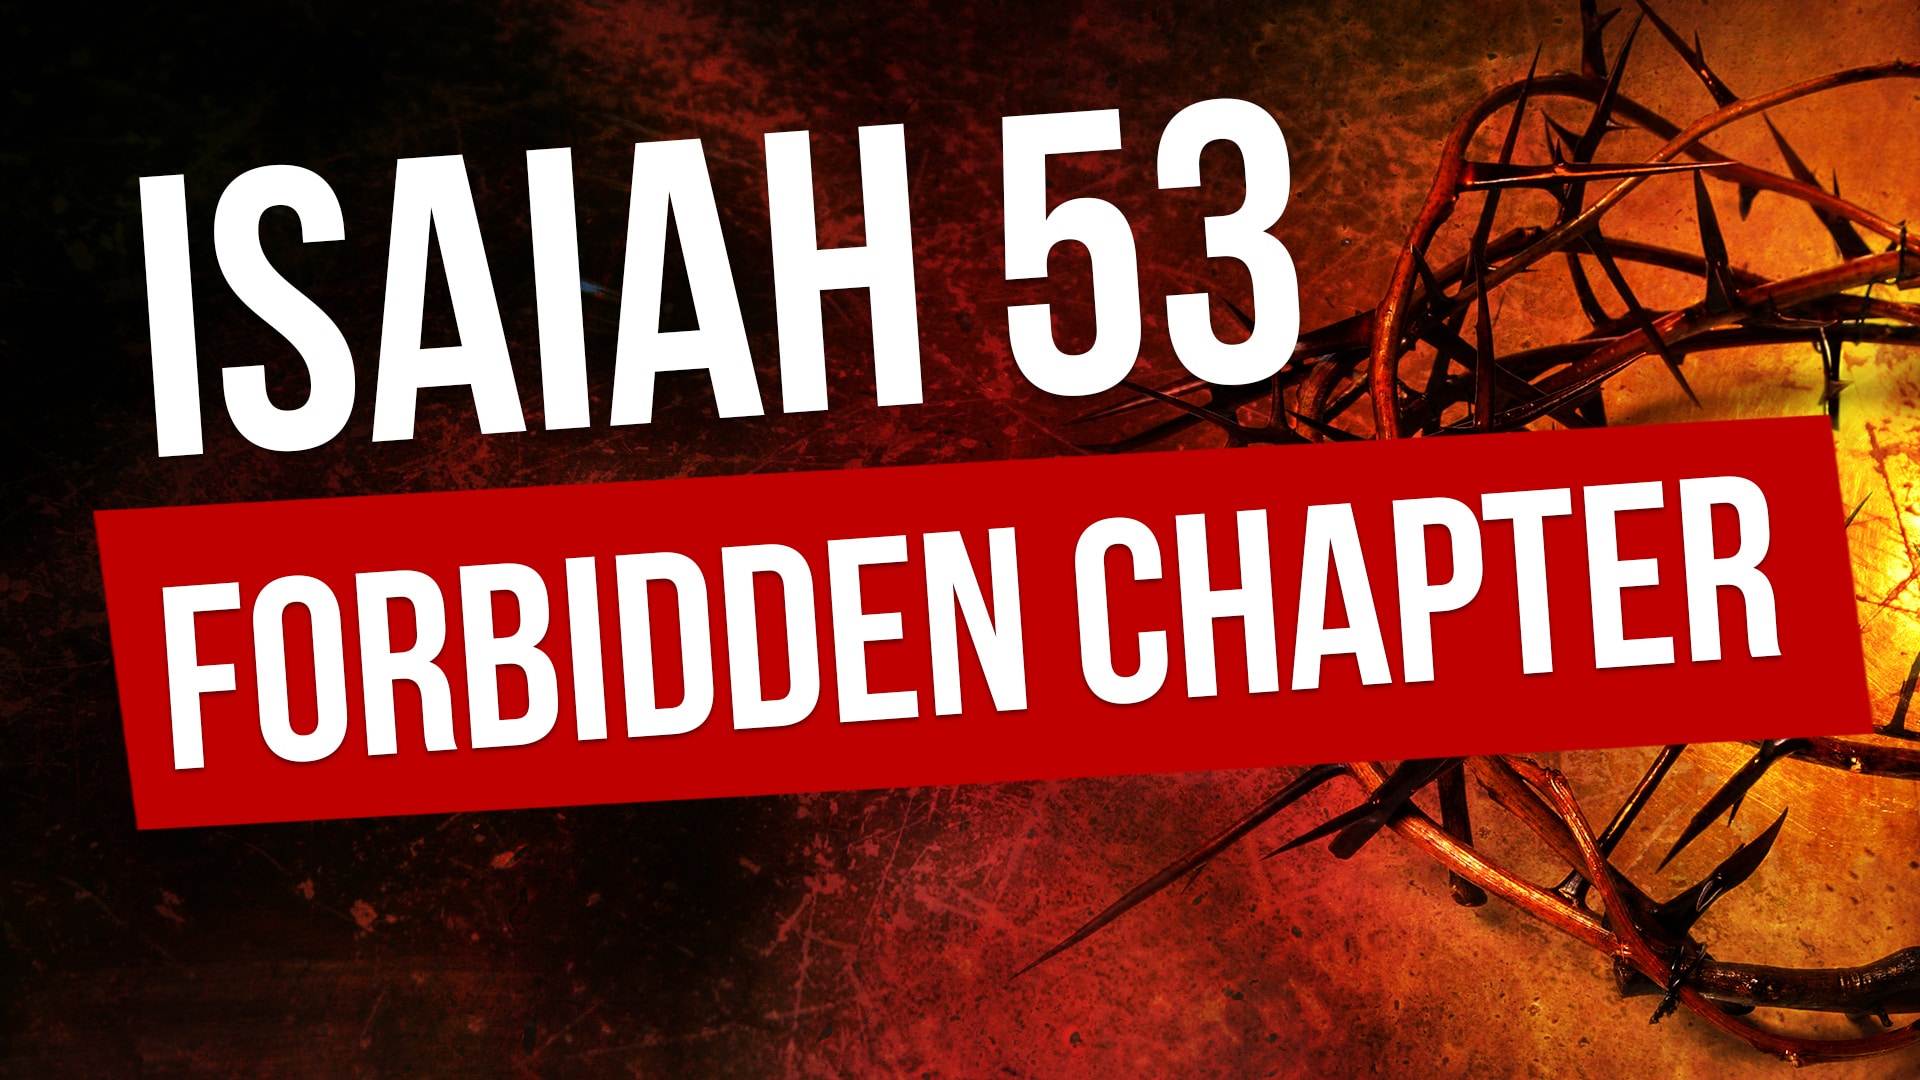 Isaiah 53 commentary - who was isaiah in the bible and what is the meaning in Hebrew of chapter 53